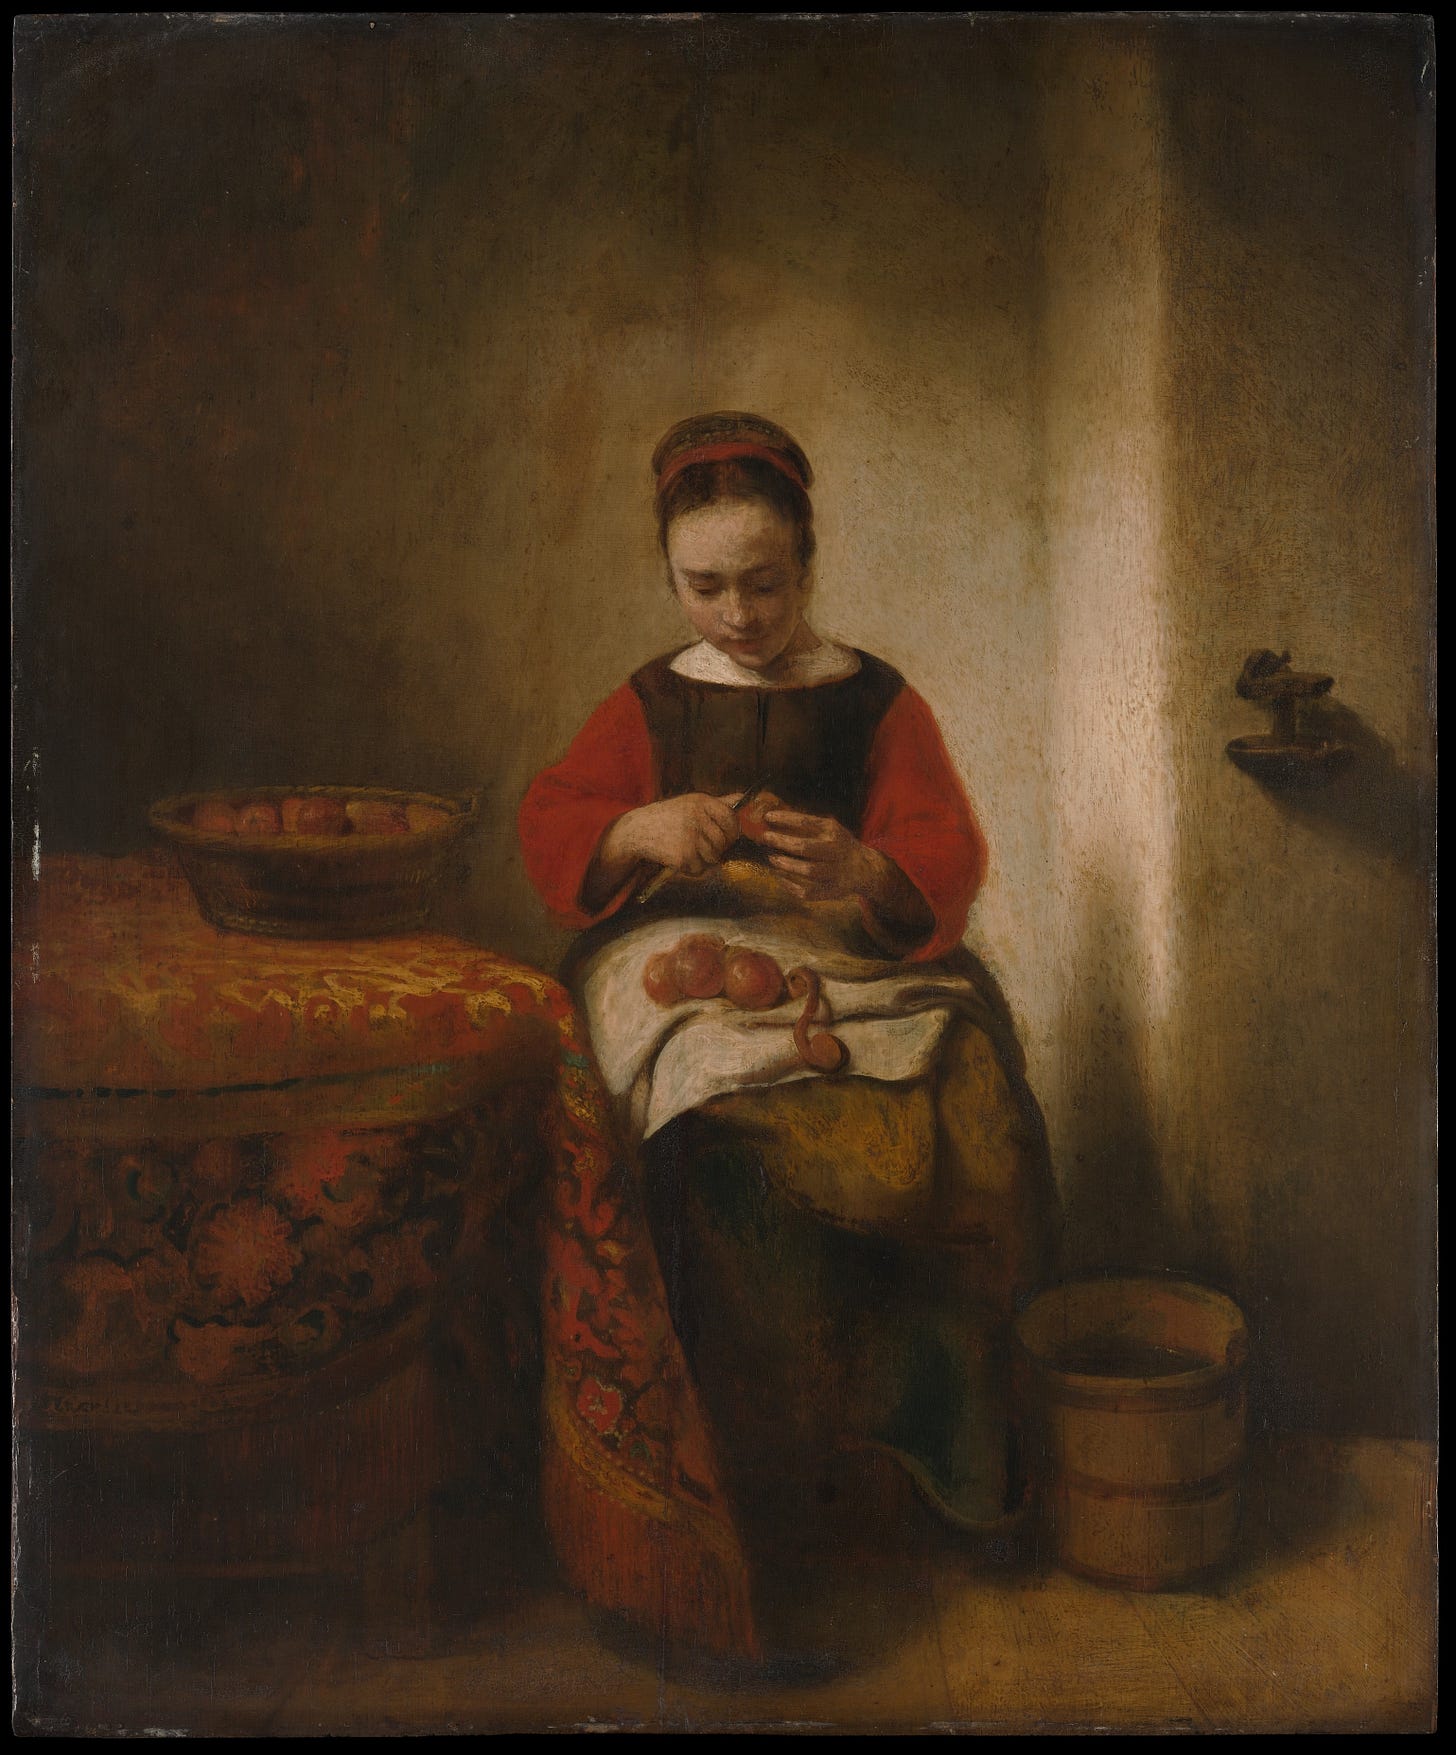 A young housemaid seated next to a richly clothed table looks down at the apple she is peeling.